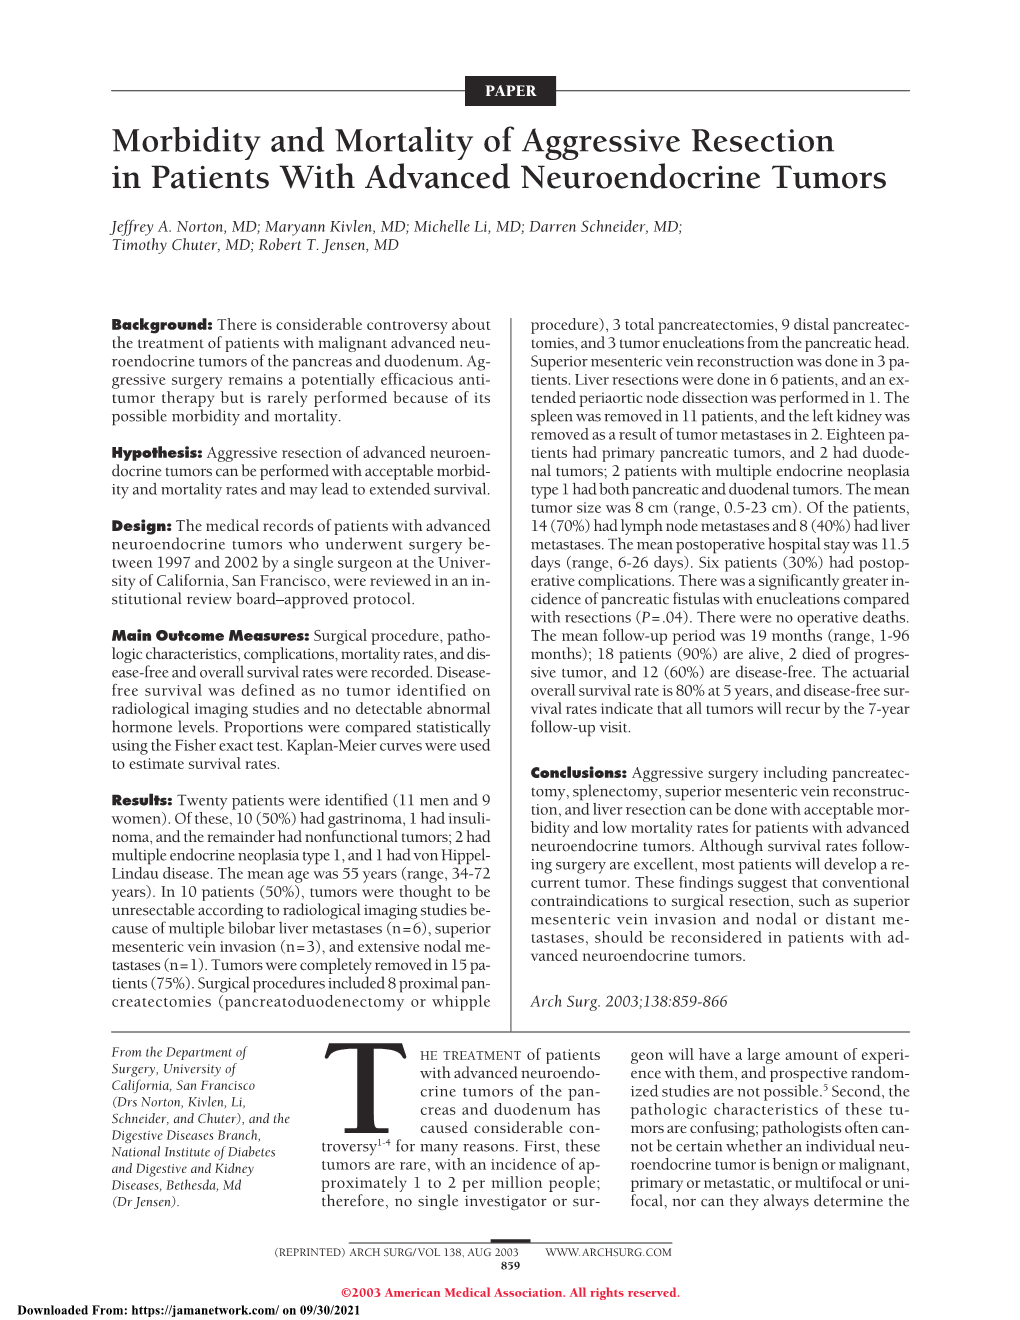 Morbidity and Mortality of Aggressive Resection in Patients with Advanced Neuroendocrine Tumors